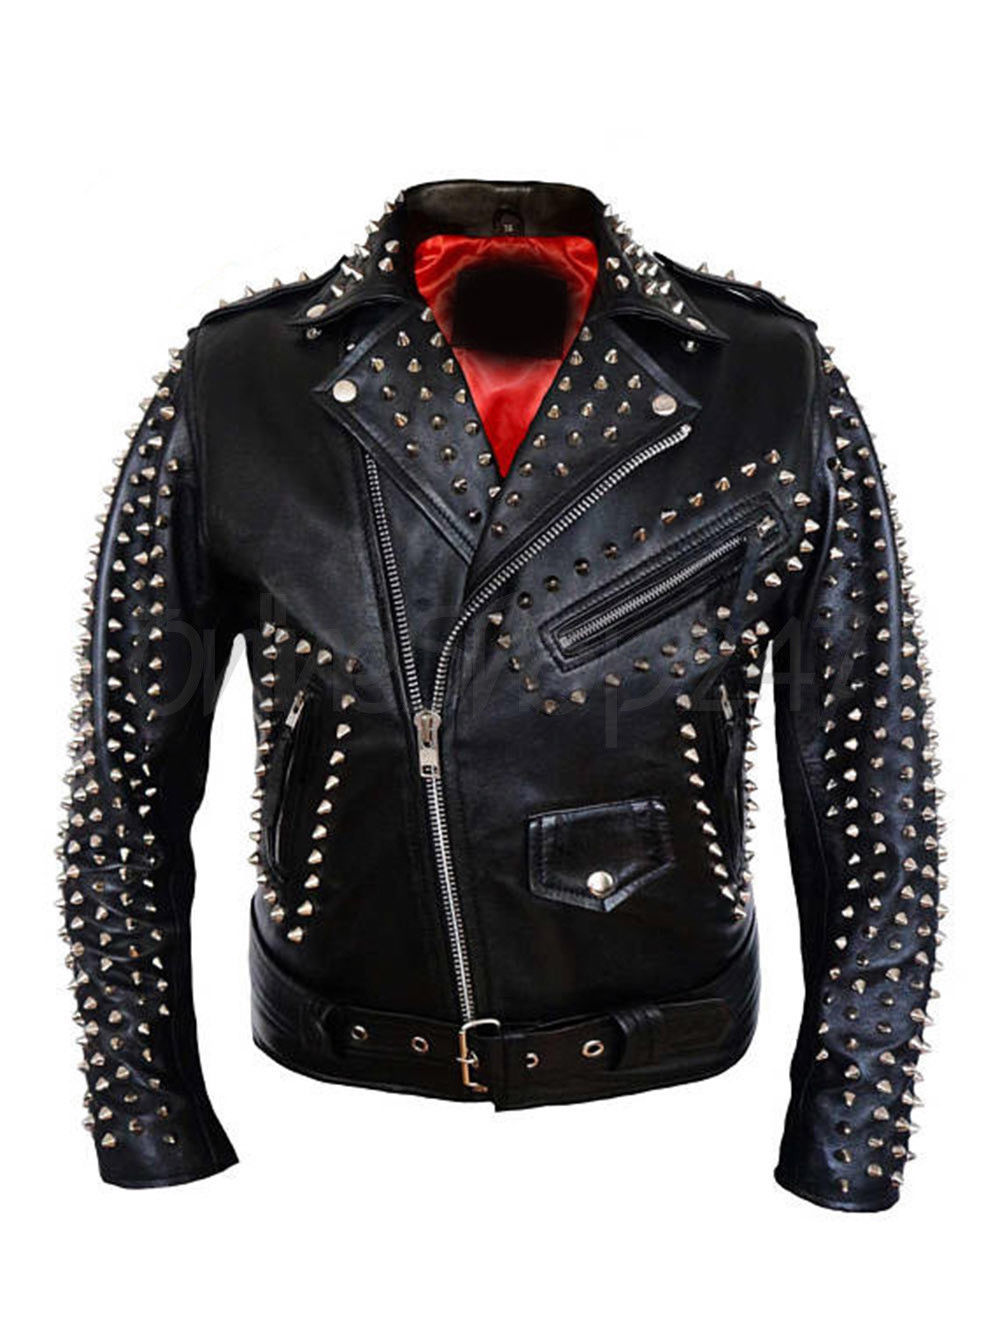 New Mens Punk Johnny Cap Black Full Silver Spiked Studded Brando Leather Jacket